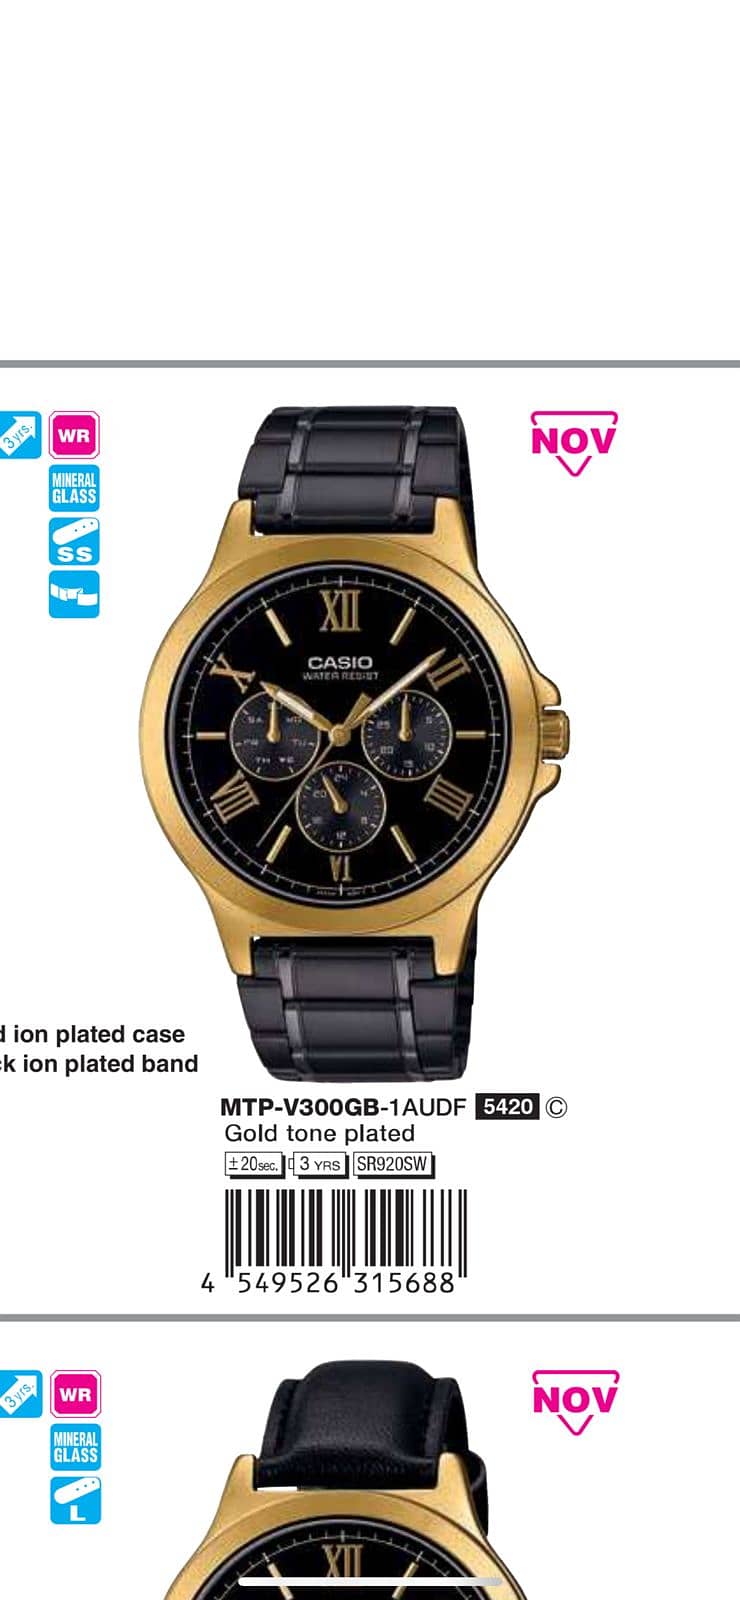 Casio watches on discounted prices 13